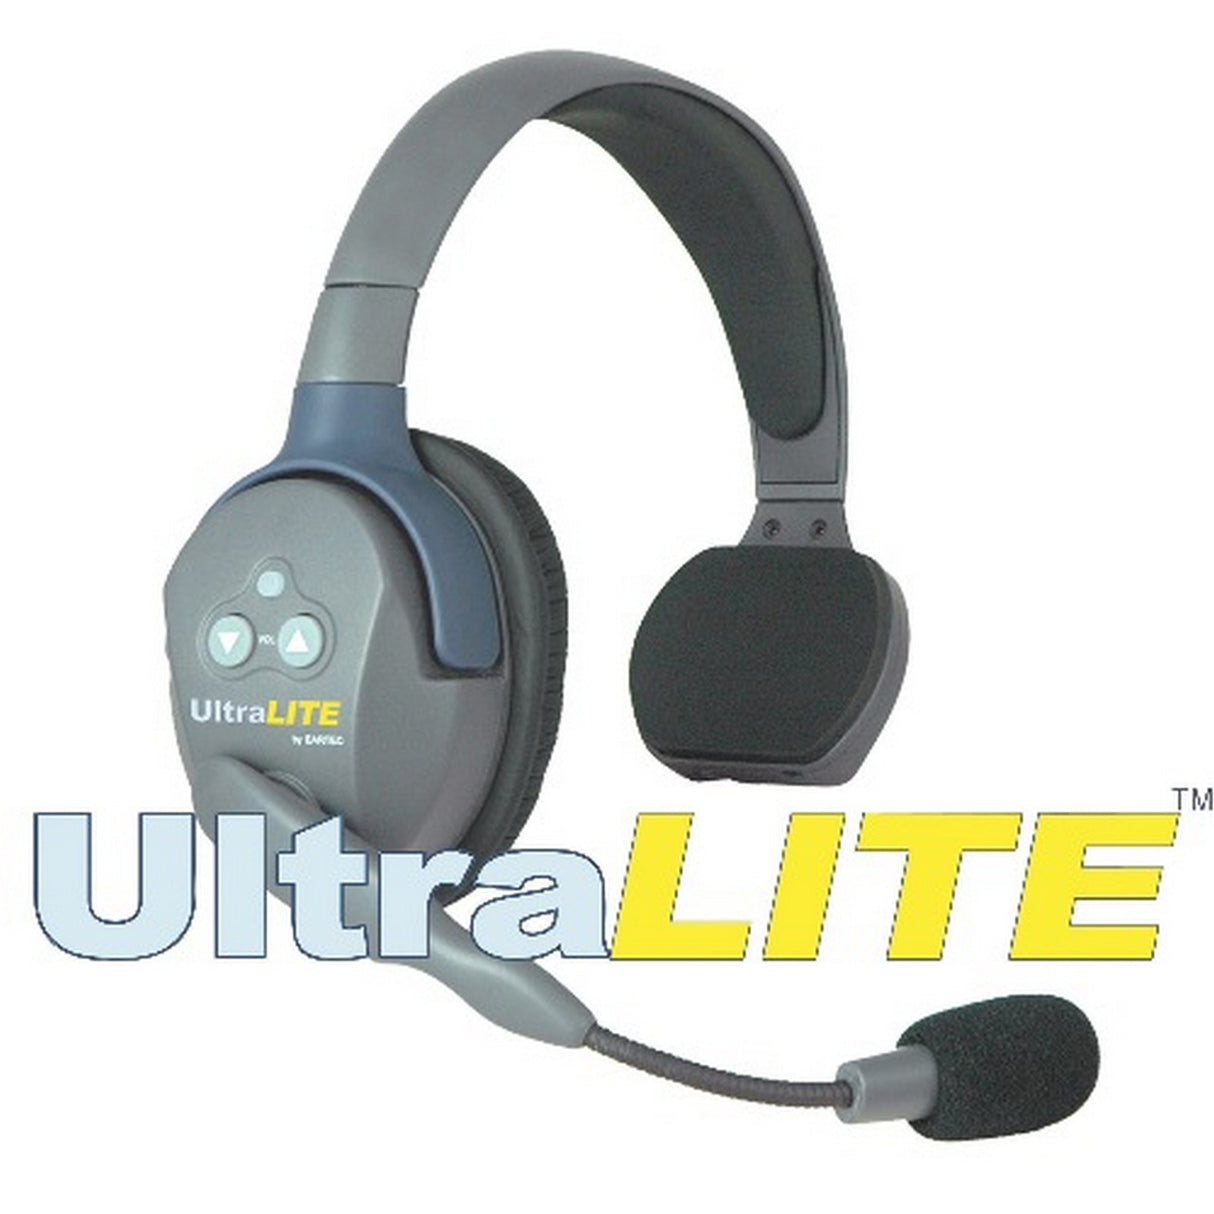 Eartec UltraLITE and HUB | 7 Person System 1 Single 5 Double 1 Cyber Headset